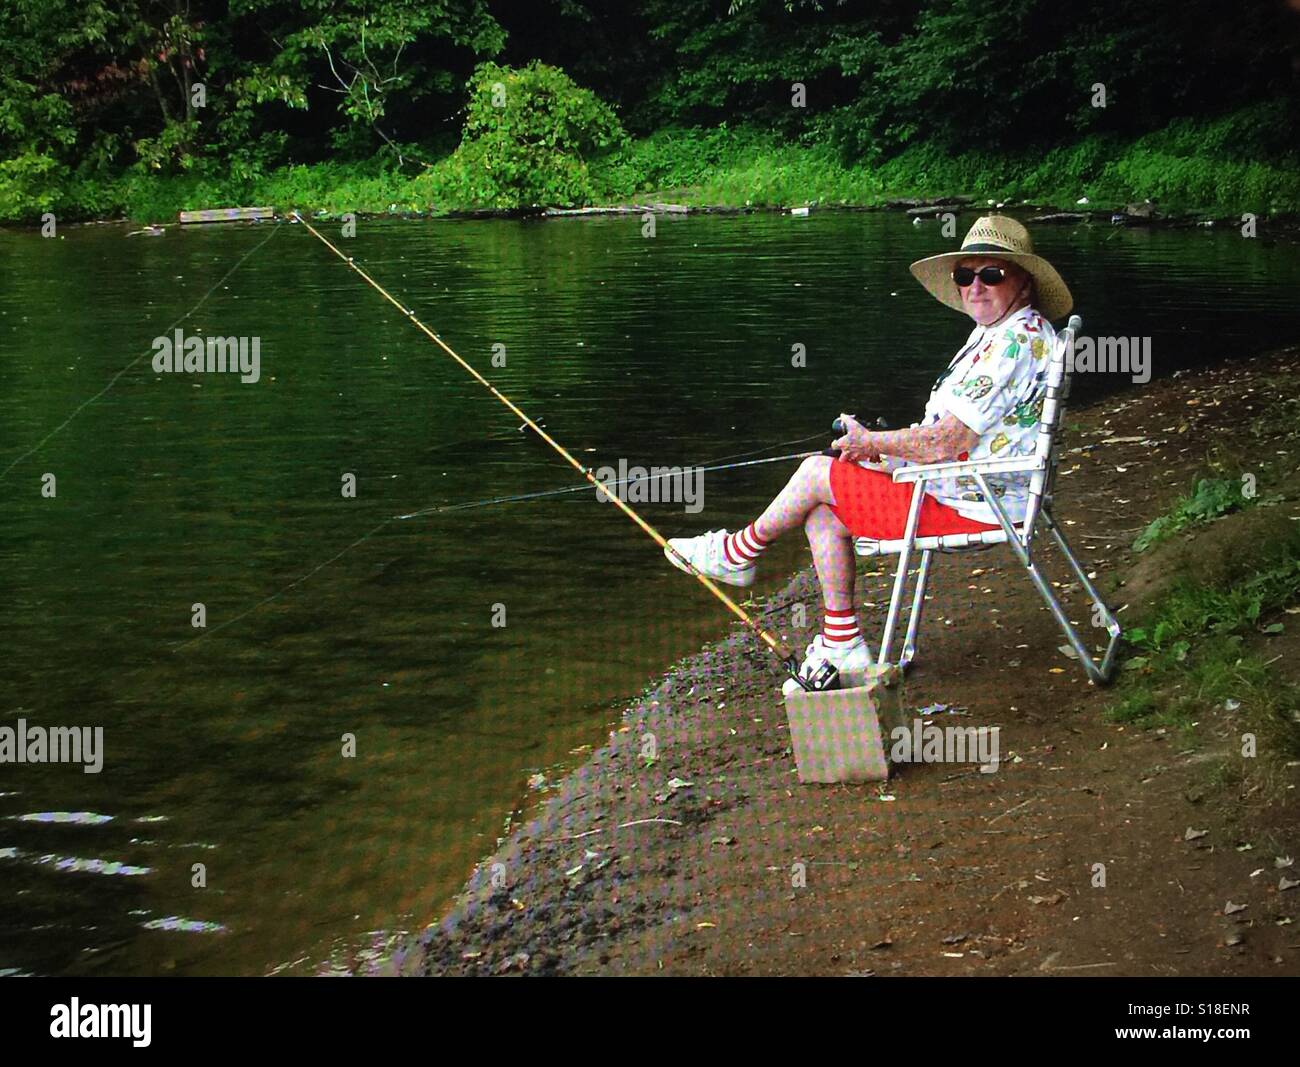 An elderly woman dressed in shorts and a hat sitting in a lawn chair fishing at a lake Stock Photo